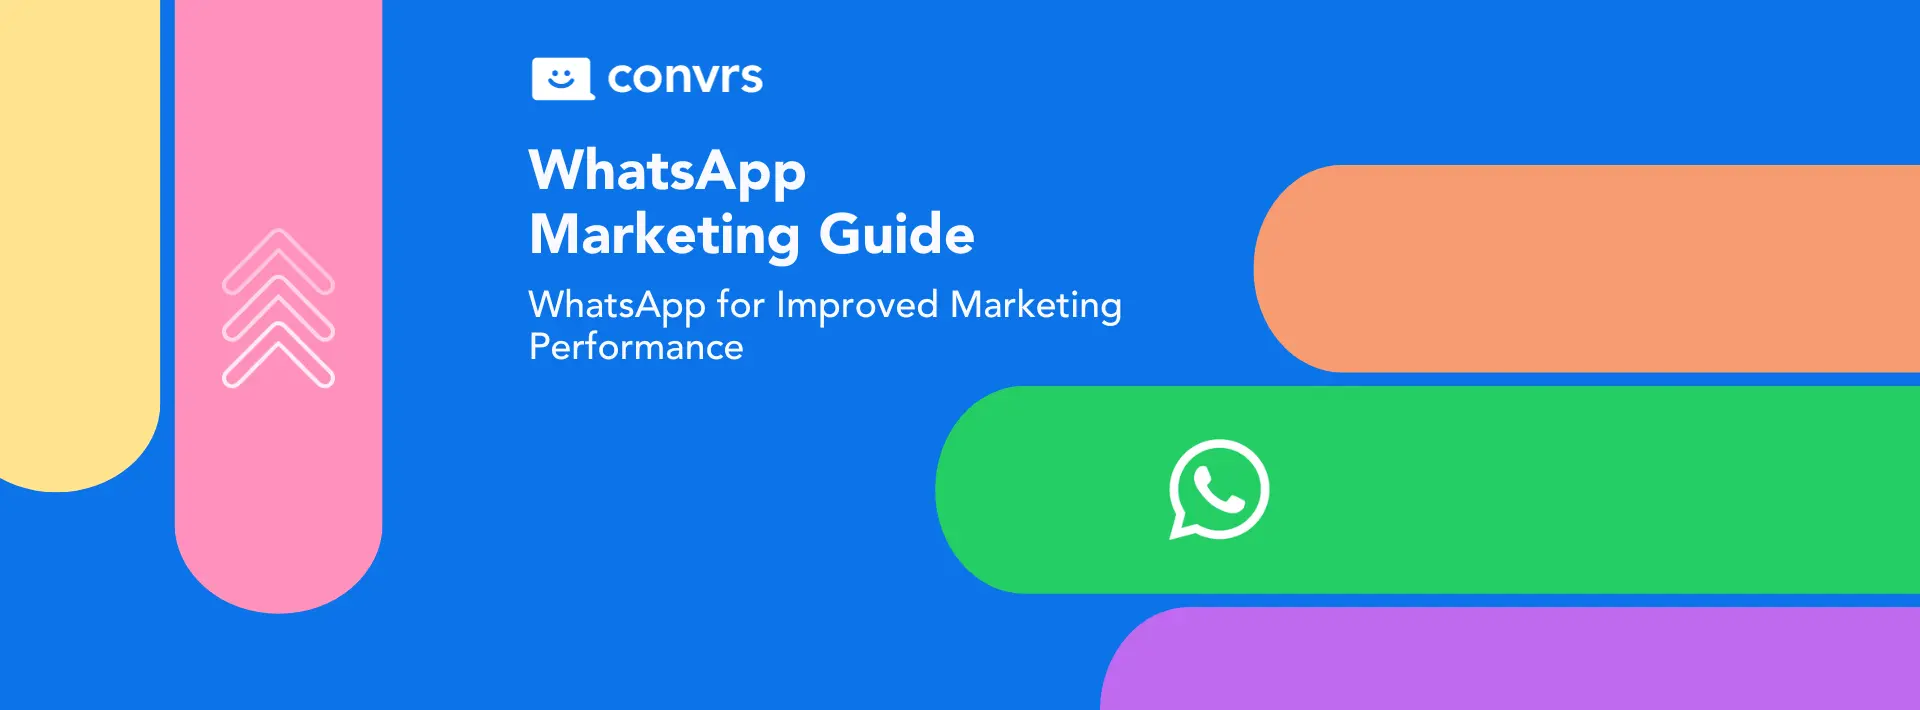 A Guide to Marketing on the WhatsApp platform